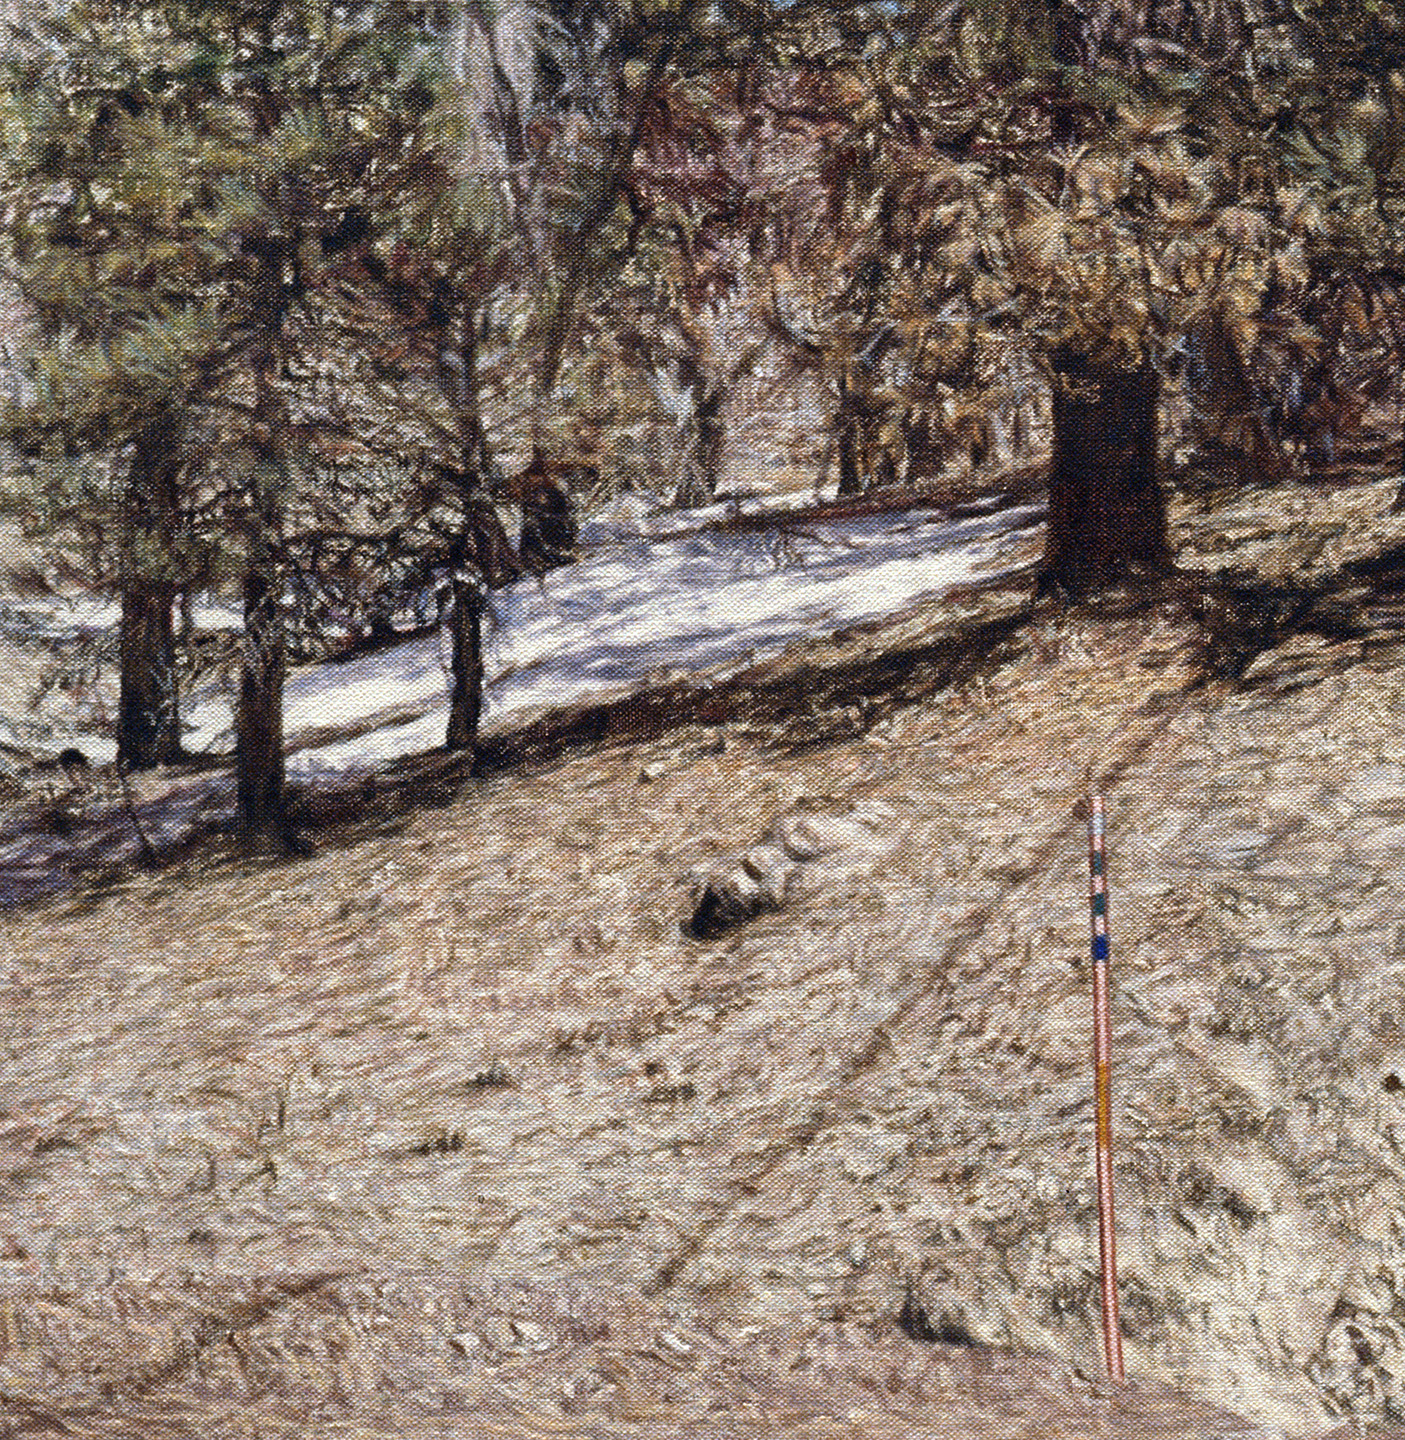   Big Bear Land Slab  (Detail), 2011 Oil on linen 48 x 47 inches    